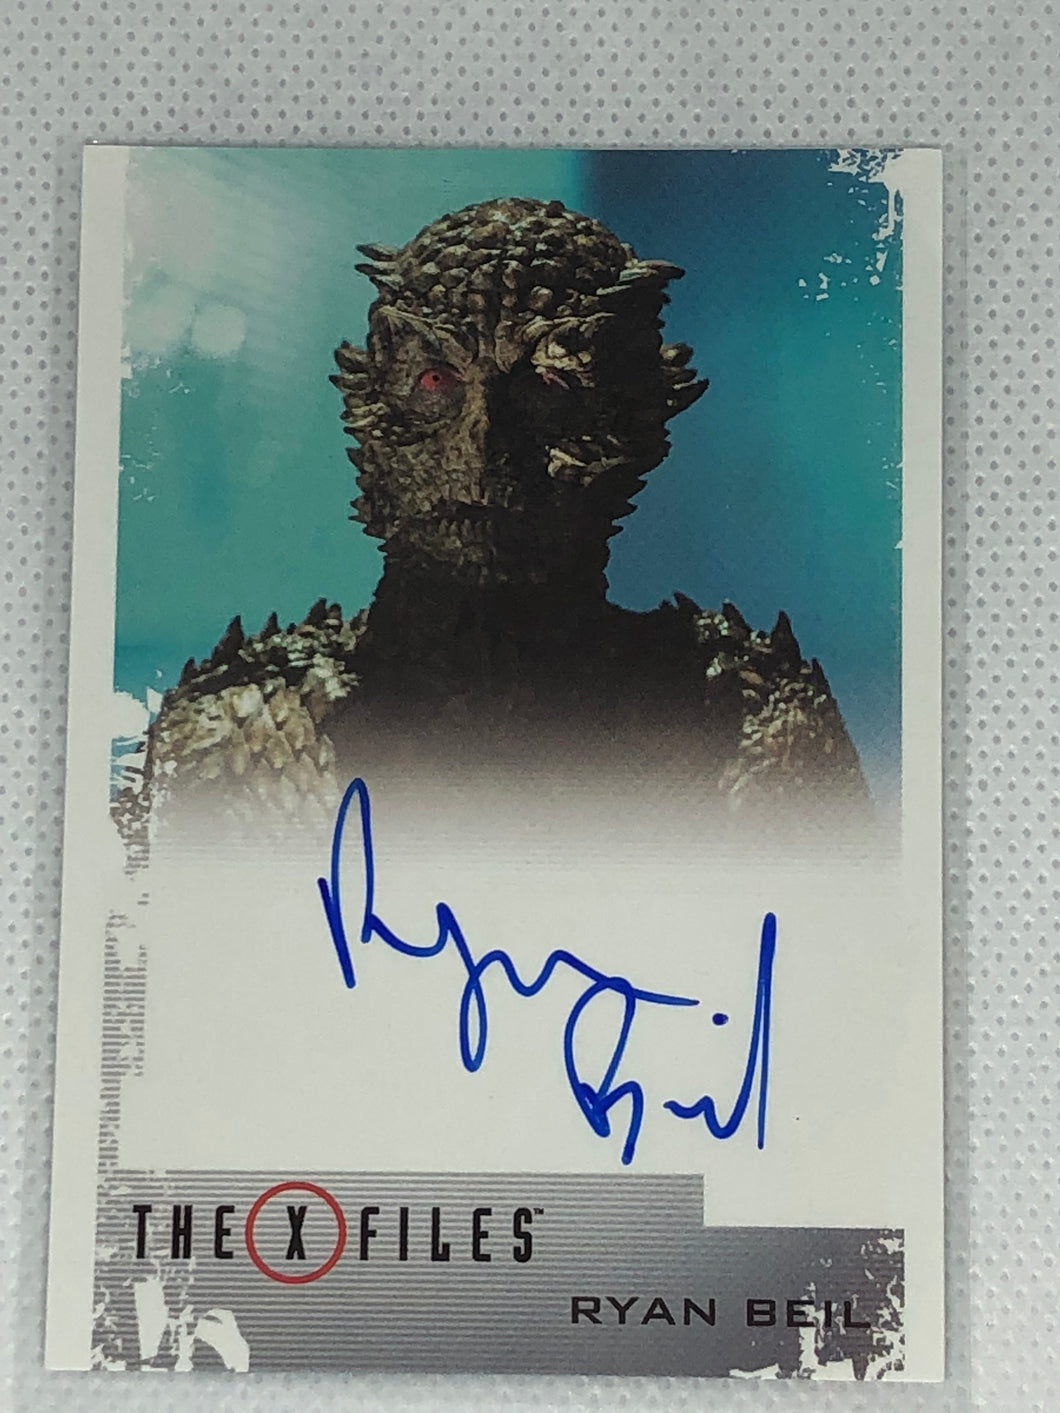 X Files - Ryan Beil (The Were-Lizard) signed trading card